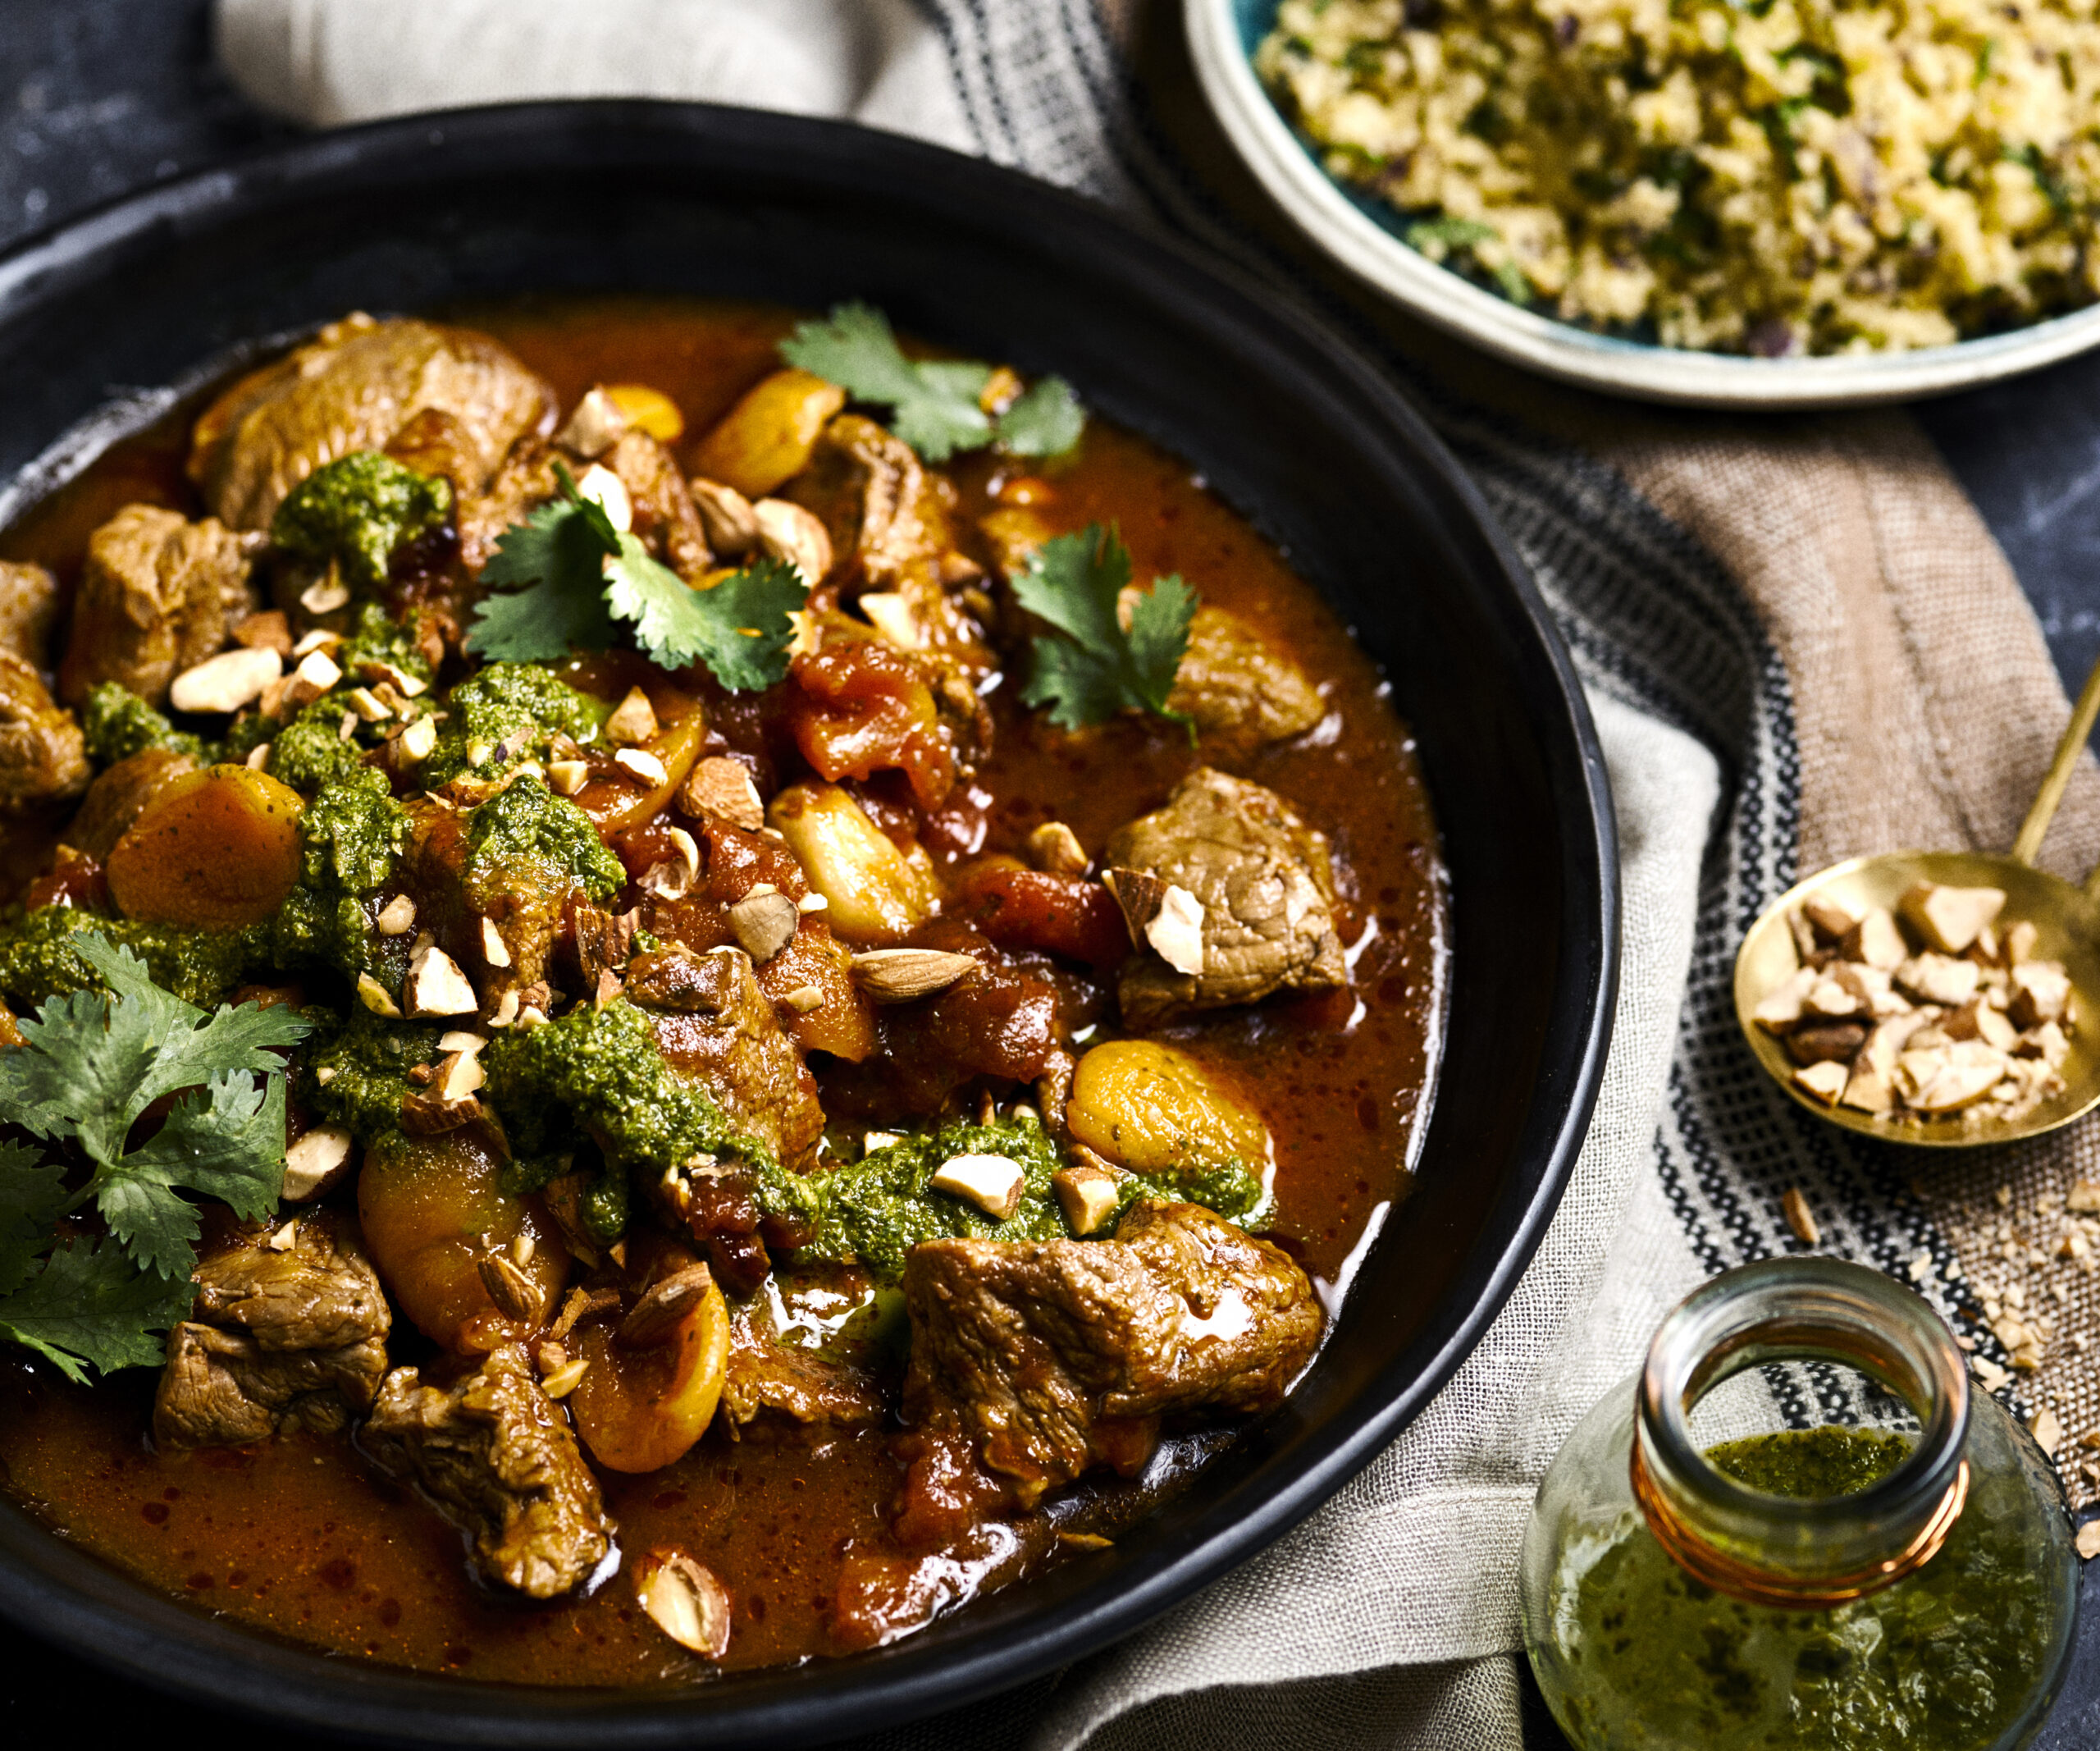 30 tasty tagines featuring lamb, chicken, fish and more